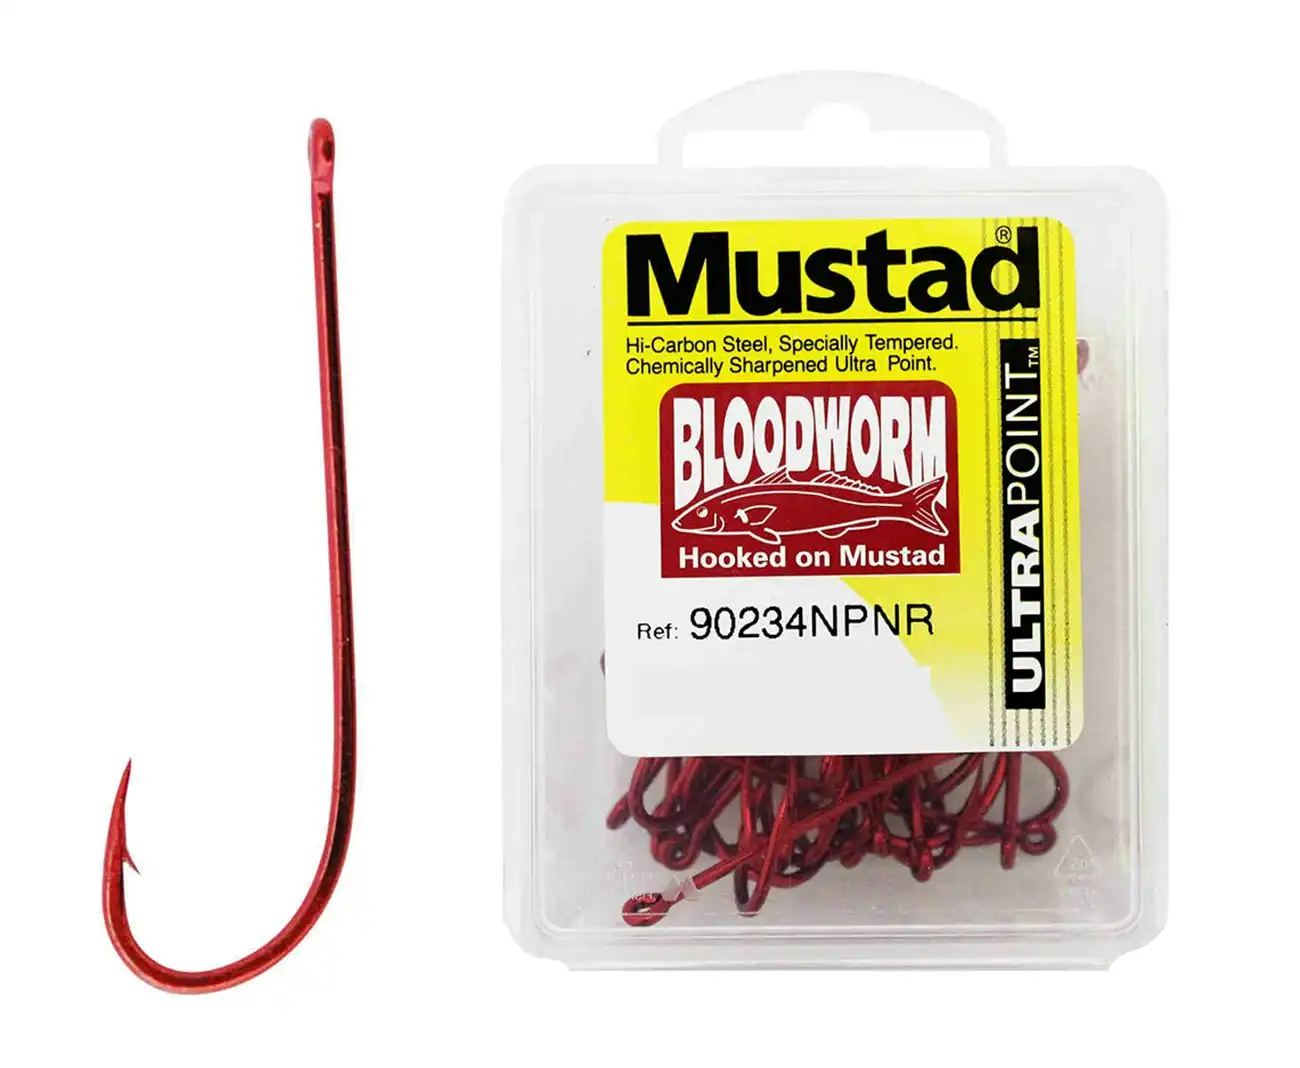 100 x Mustad 90234NPNR Bloodworm Chemically Sharpened Fishing Hooks